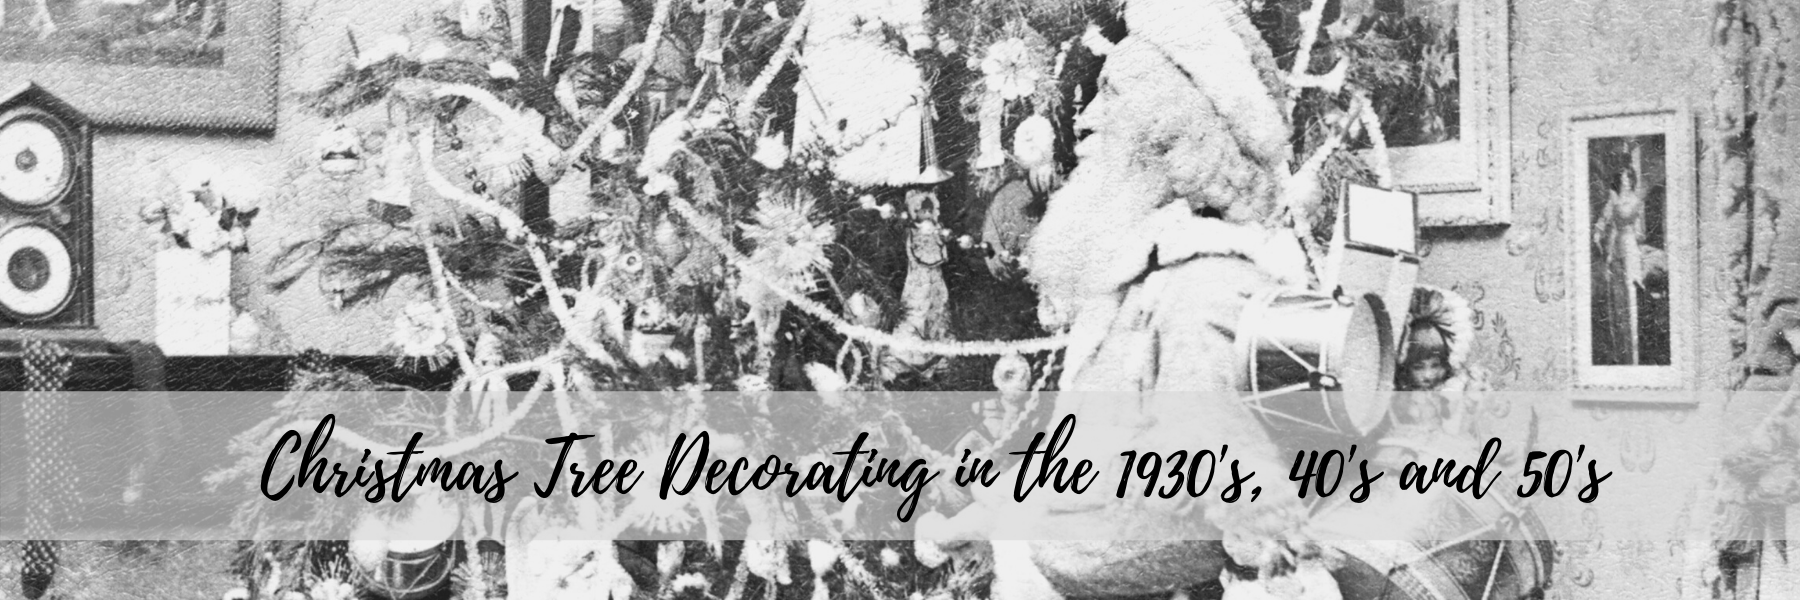 Christmas Tree Decorating in the 1930's, 40's and 50's